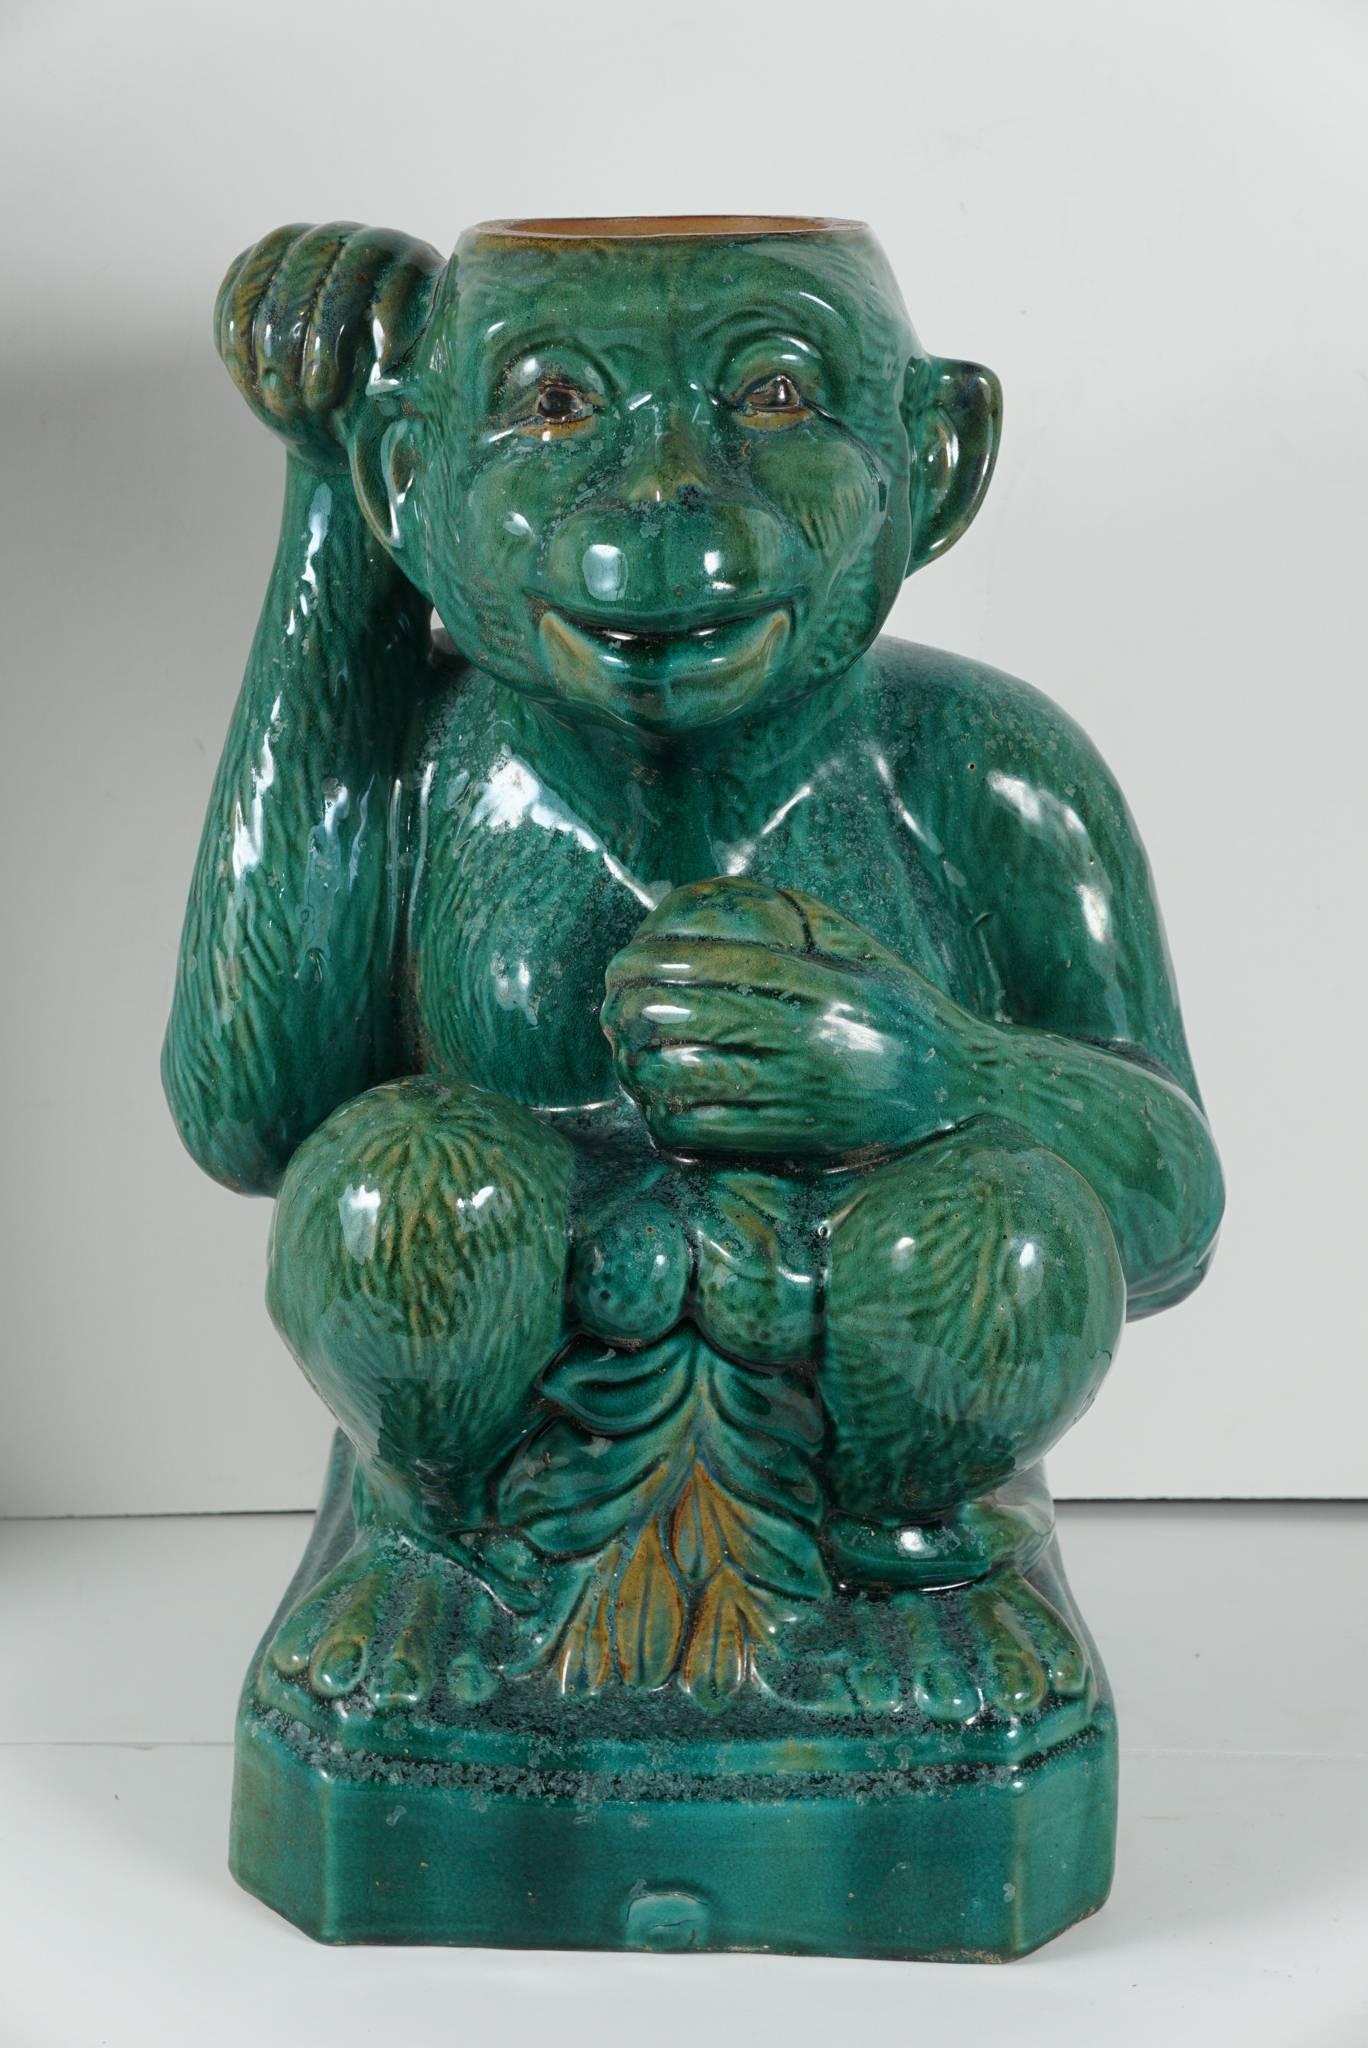 These two different monkeys from the estate of Clare Kellner.  One is an umbrella stand the other just a decorative companion are circa 1950. The figures are lively and realistic in form with detailed facial expressions and poses. The glazed green